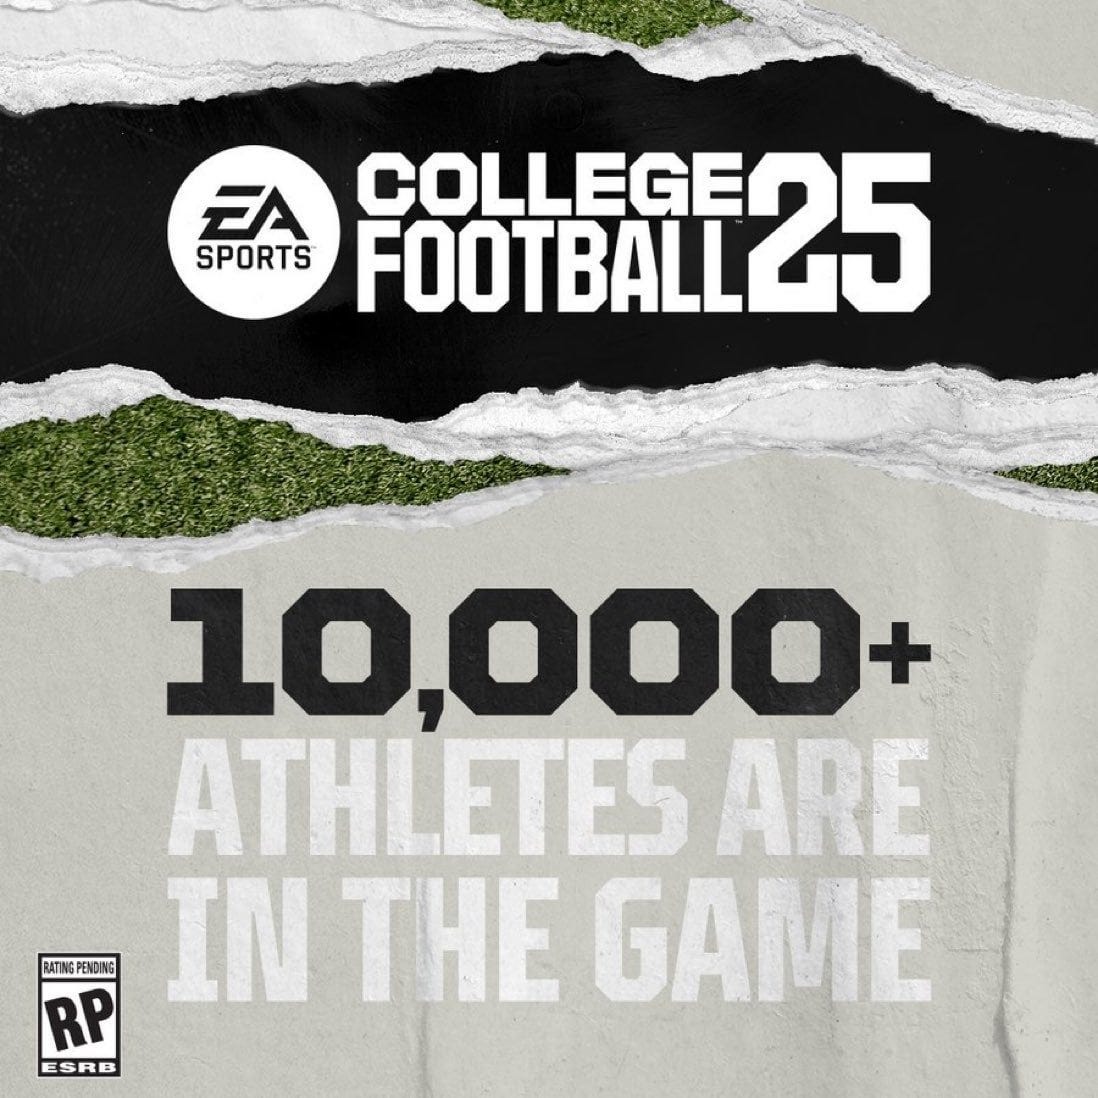 Pete Nakos] EA Sports College Football 25 announces 10K athletes have opted  into the game. : r/NCAAFBseries